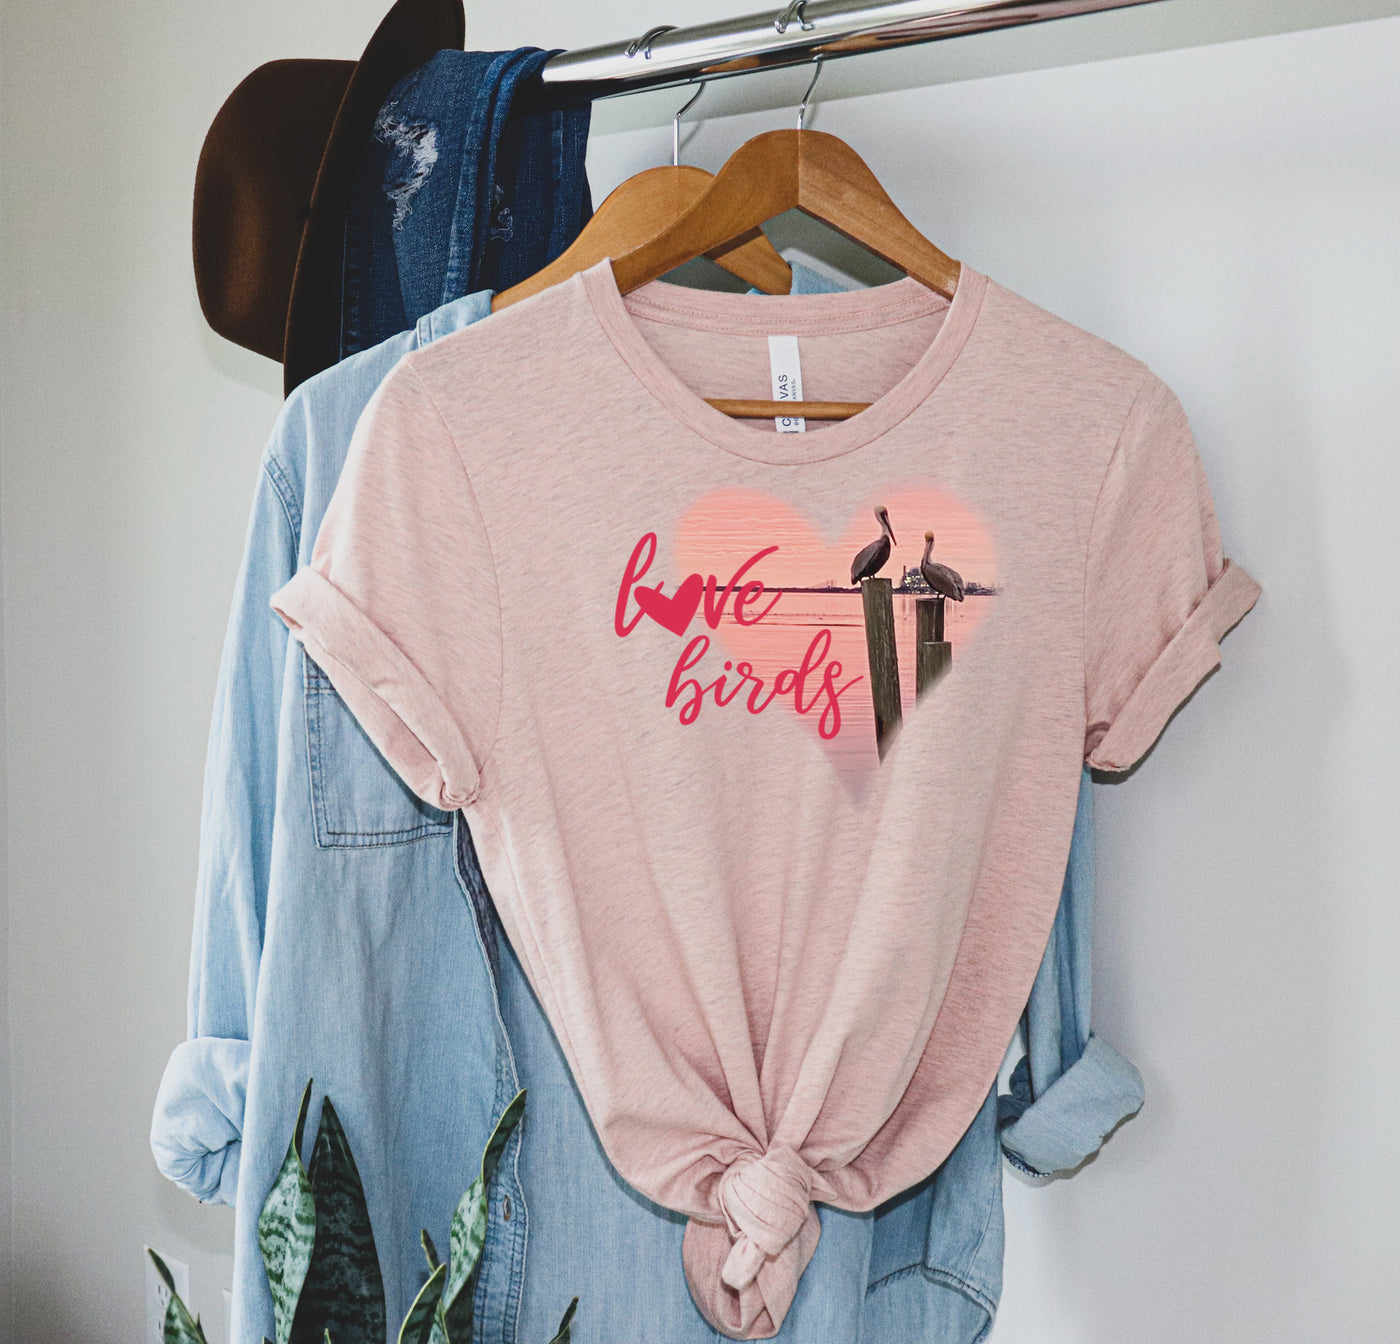 Heather peach tee with graphic. Graphic is a pink heart with a photo of some pelicans standing on post in the water. To the left of the heart are the words love birds in a pink cursive font and the O in love has been replaced with a heart.